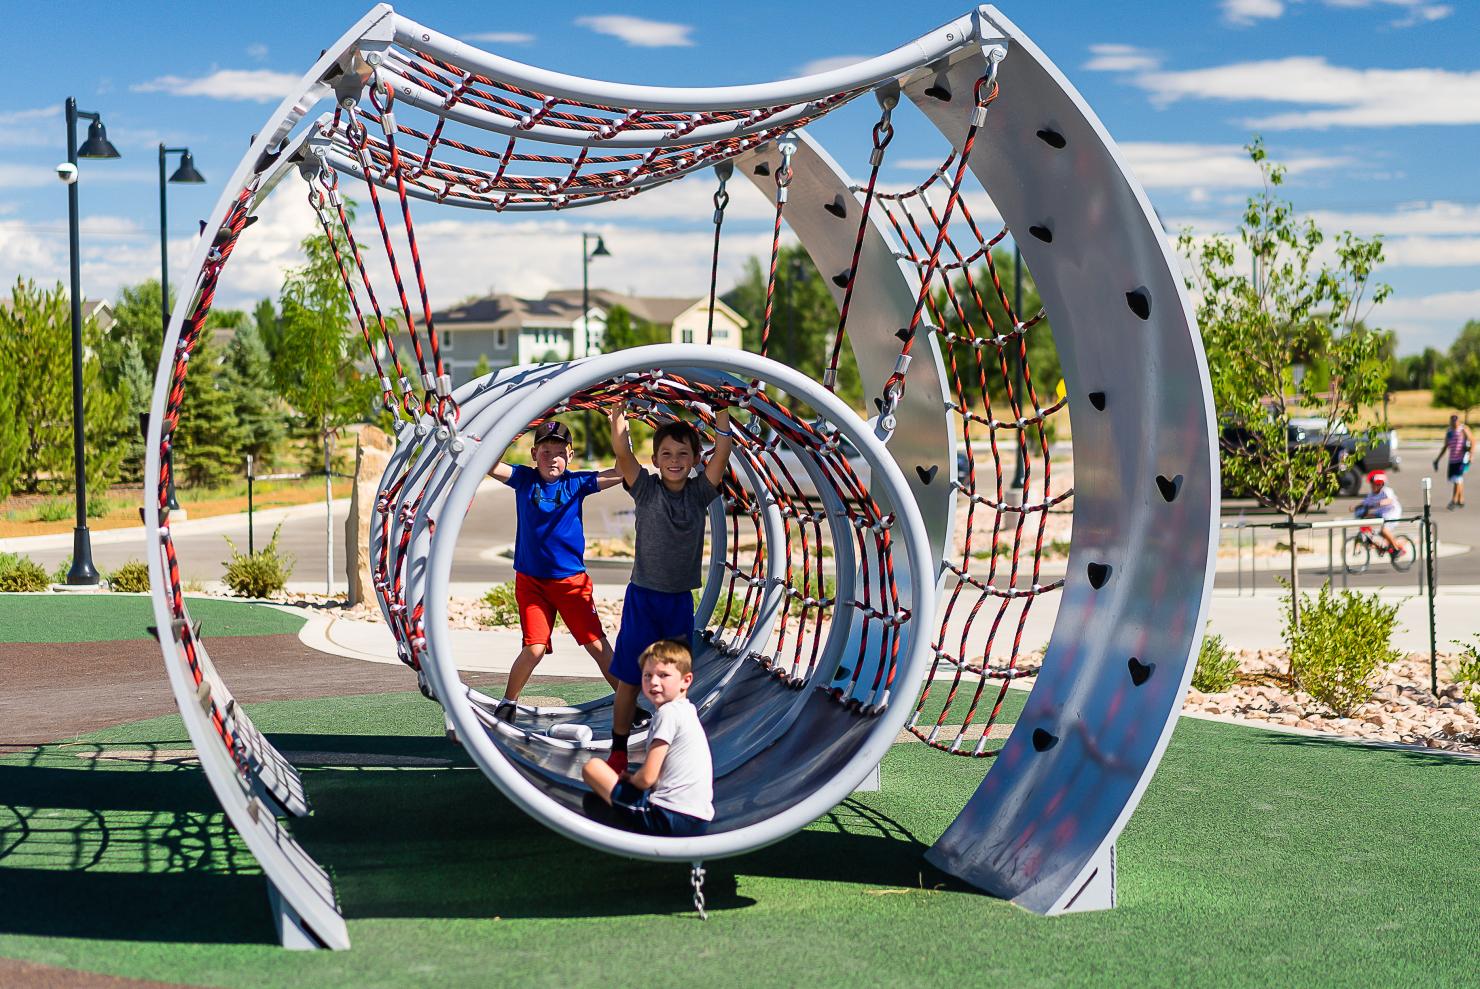 Three youth play in playground structure.